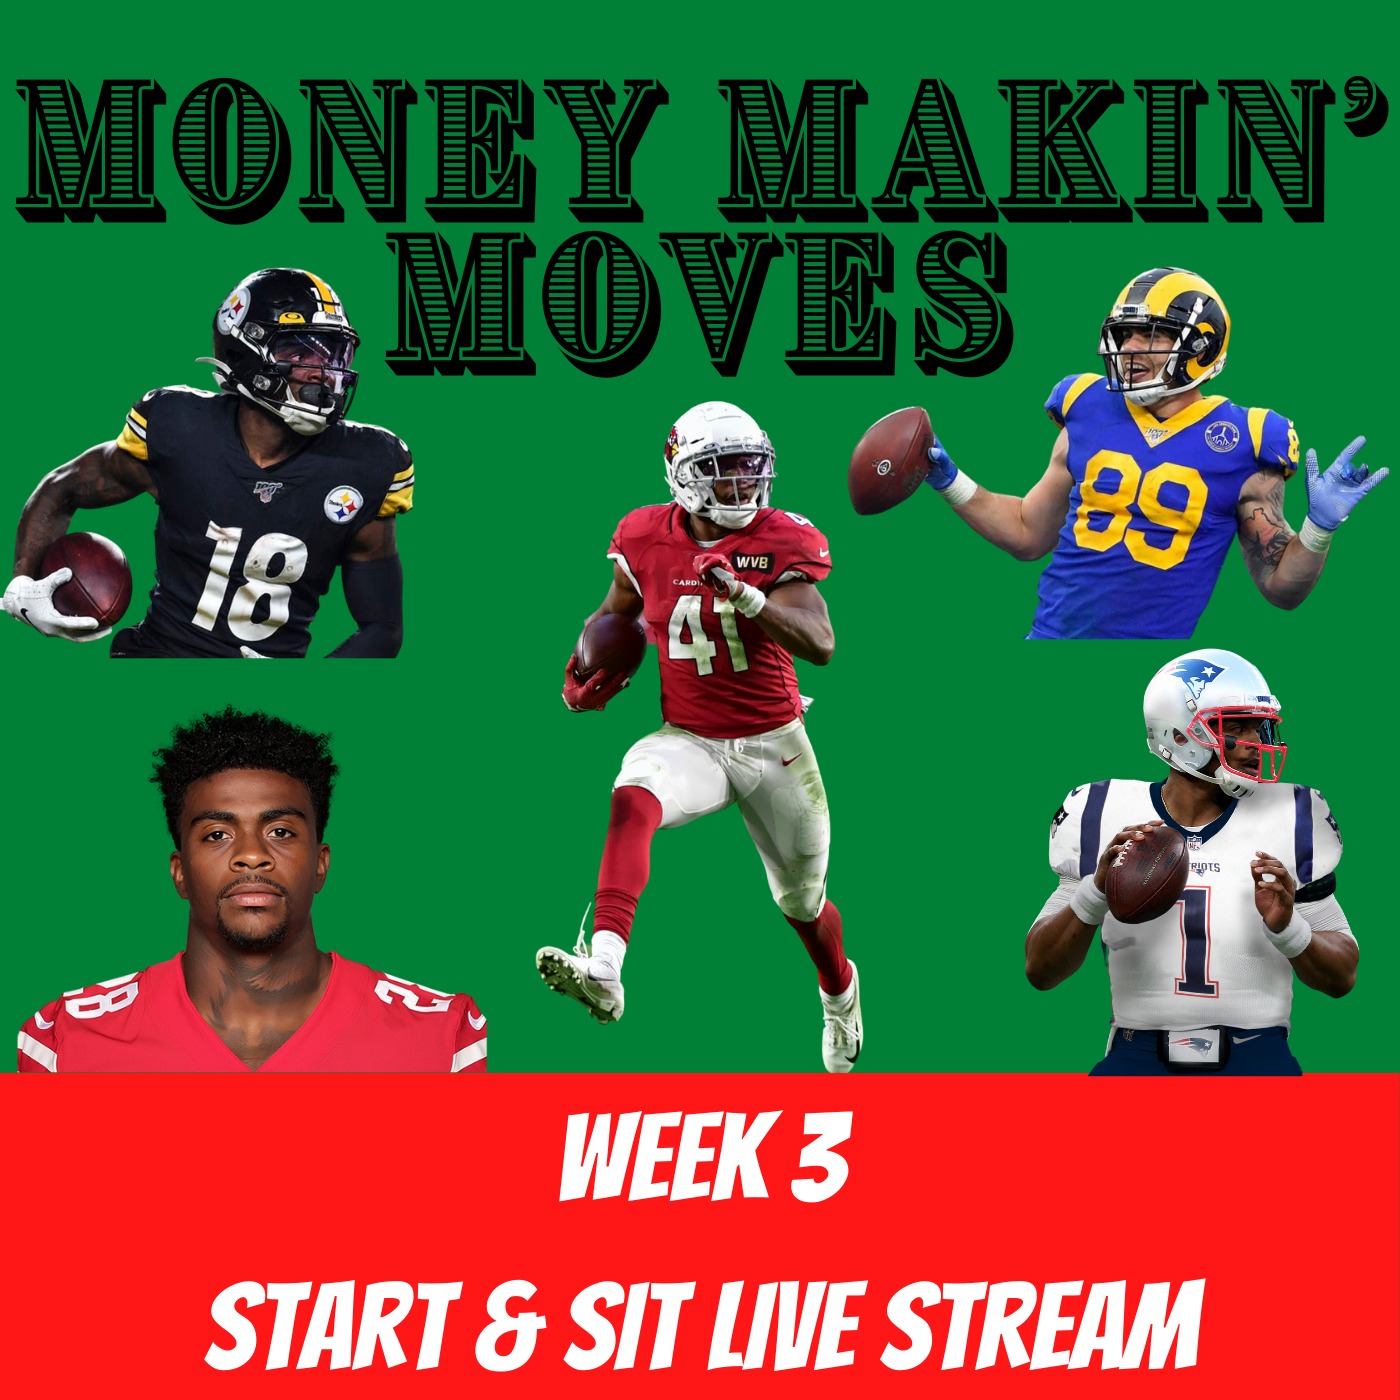 Week 3 Start and Sit Live Stream Image